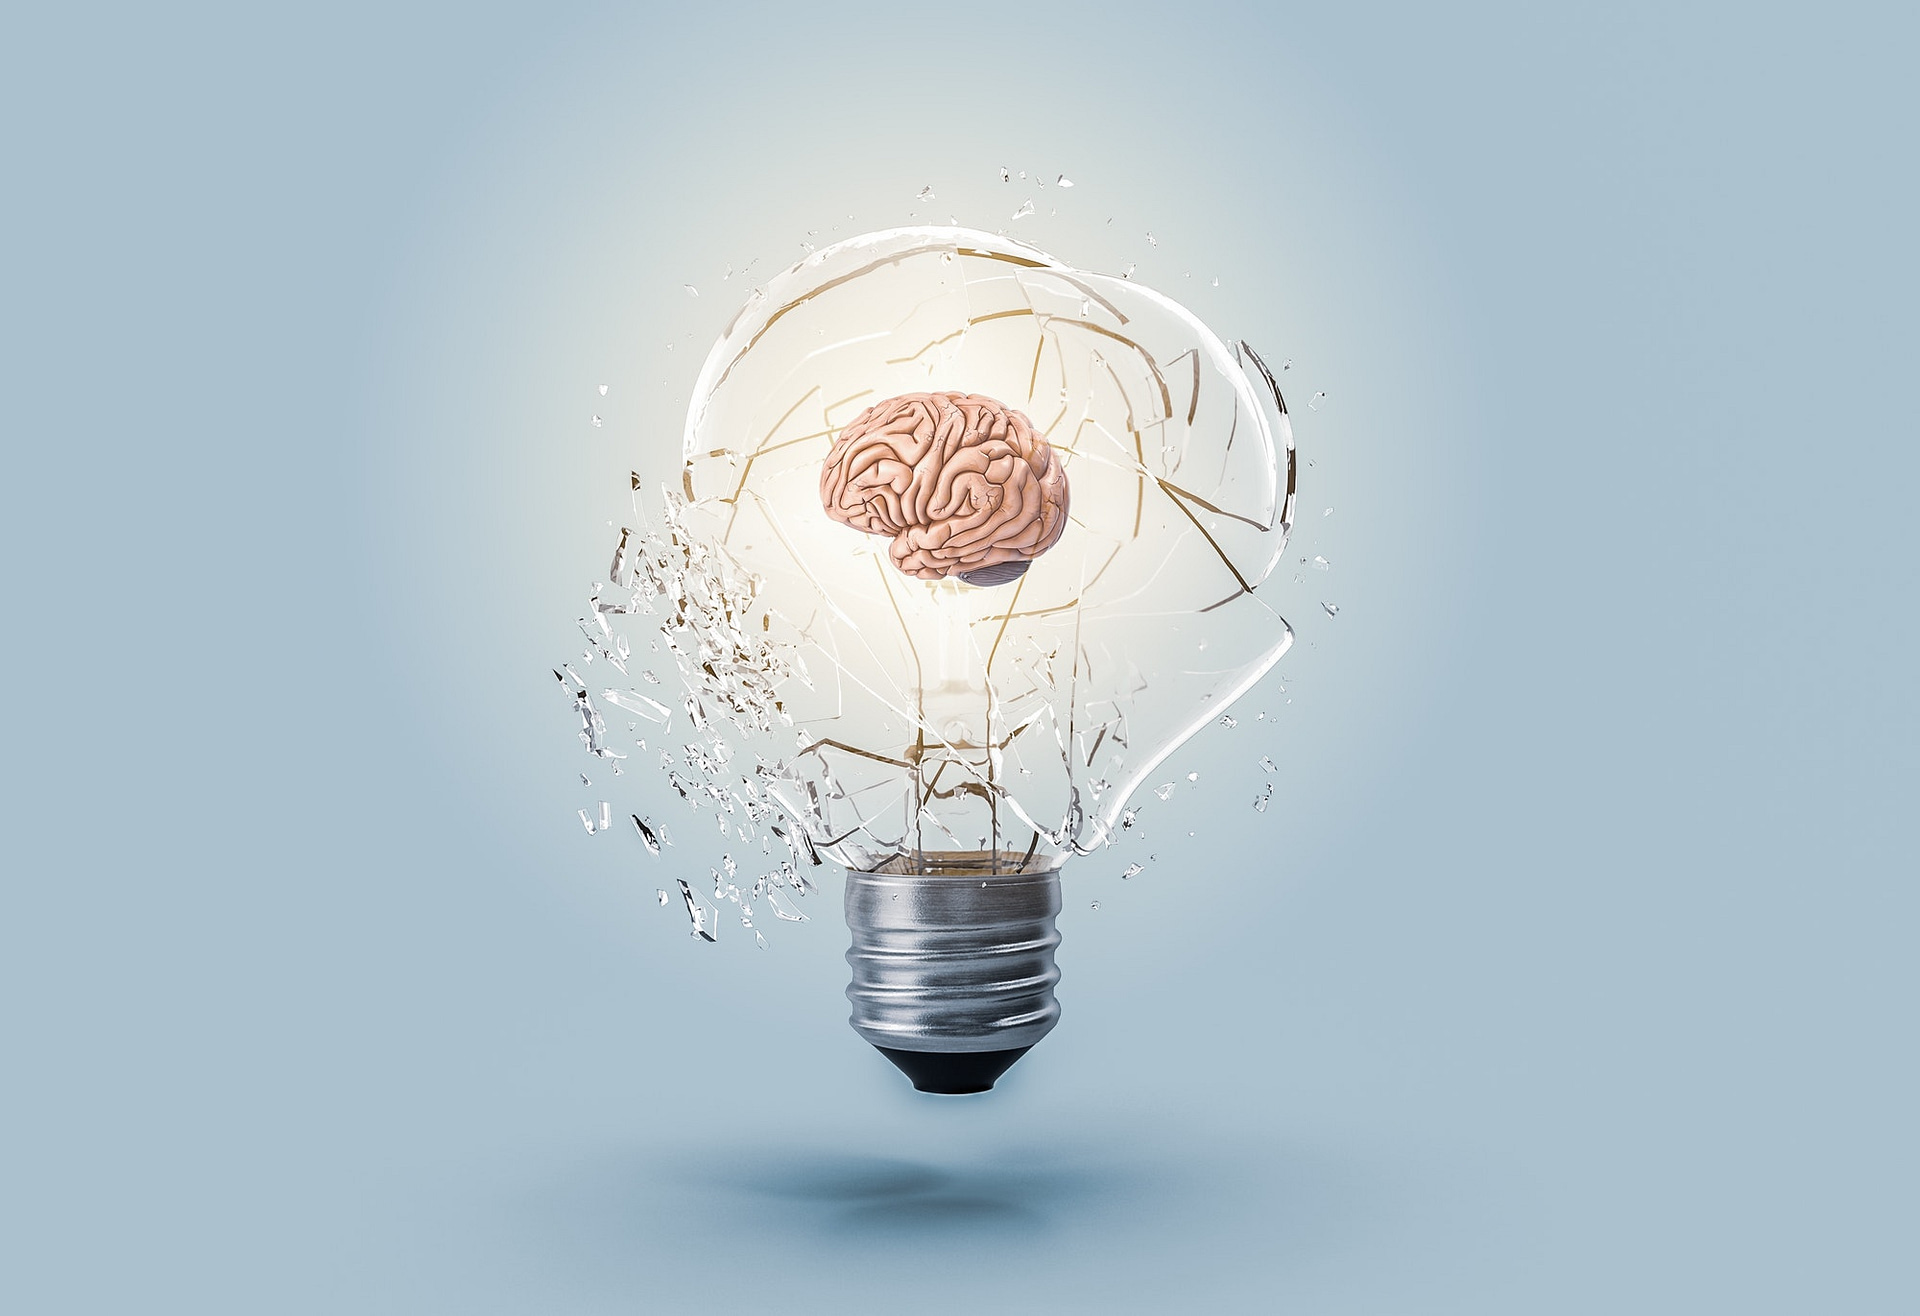 Image of breaking lightbulb with brain depicting ideas, something mindblowing